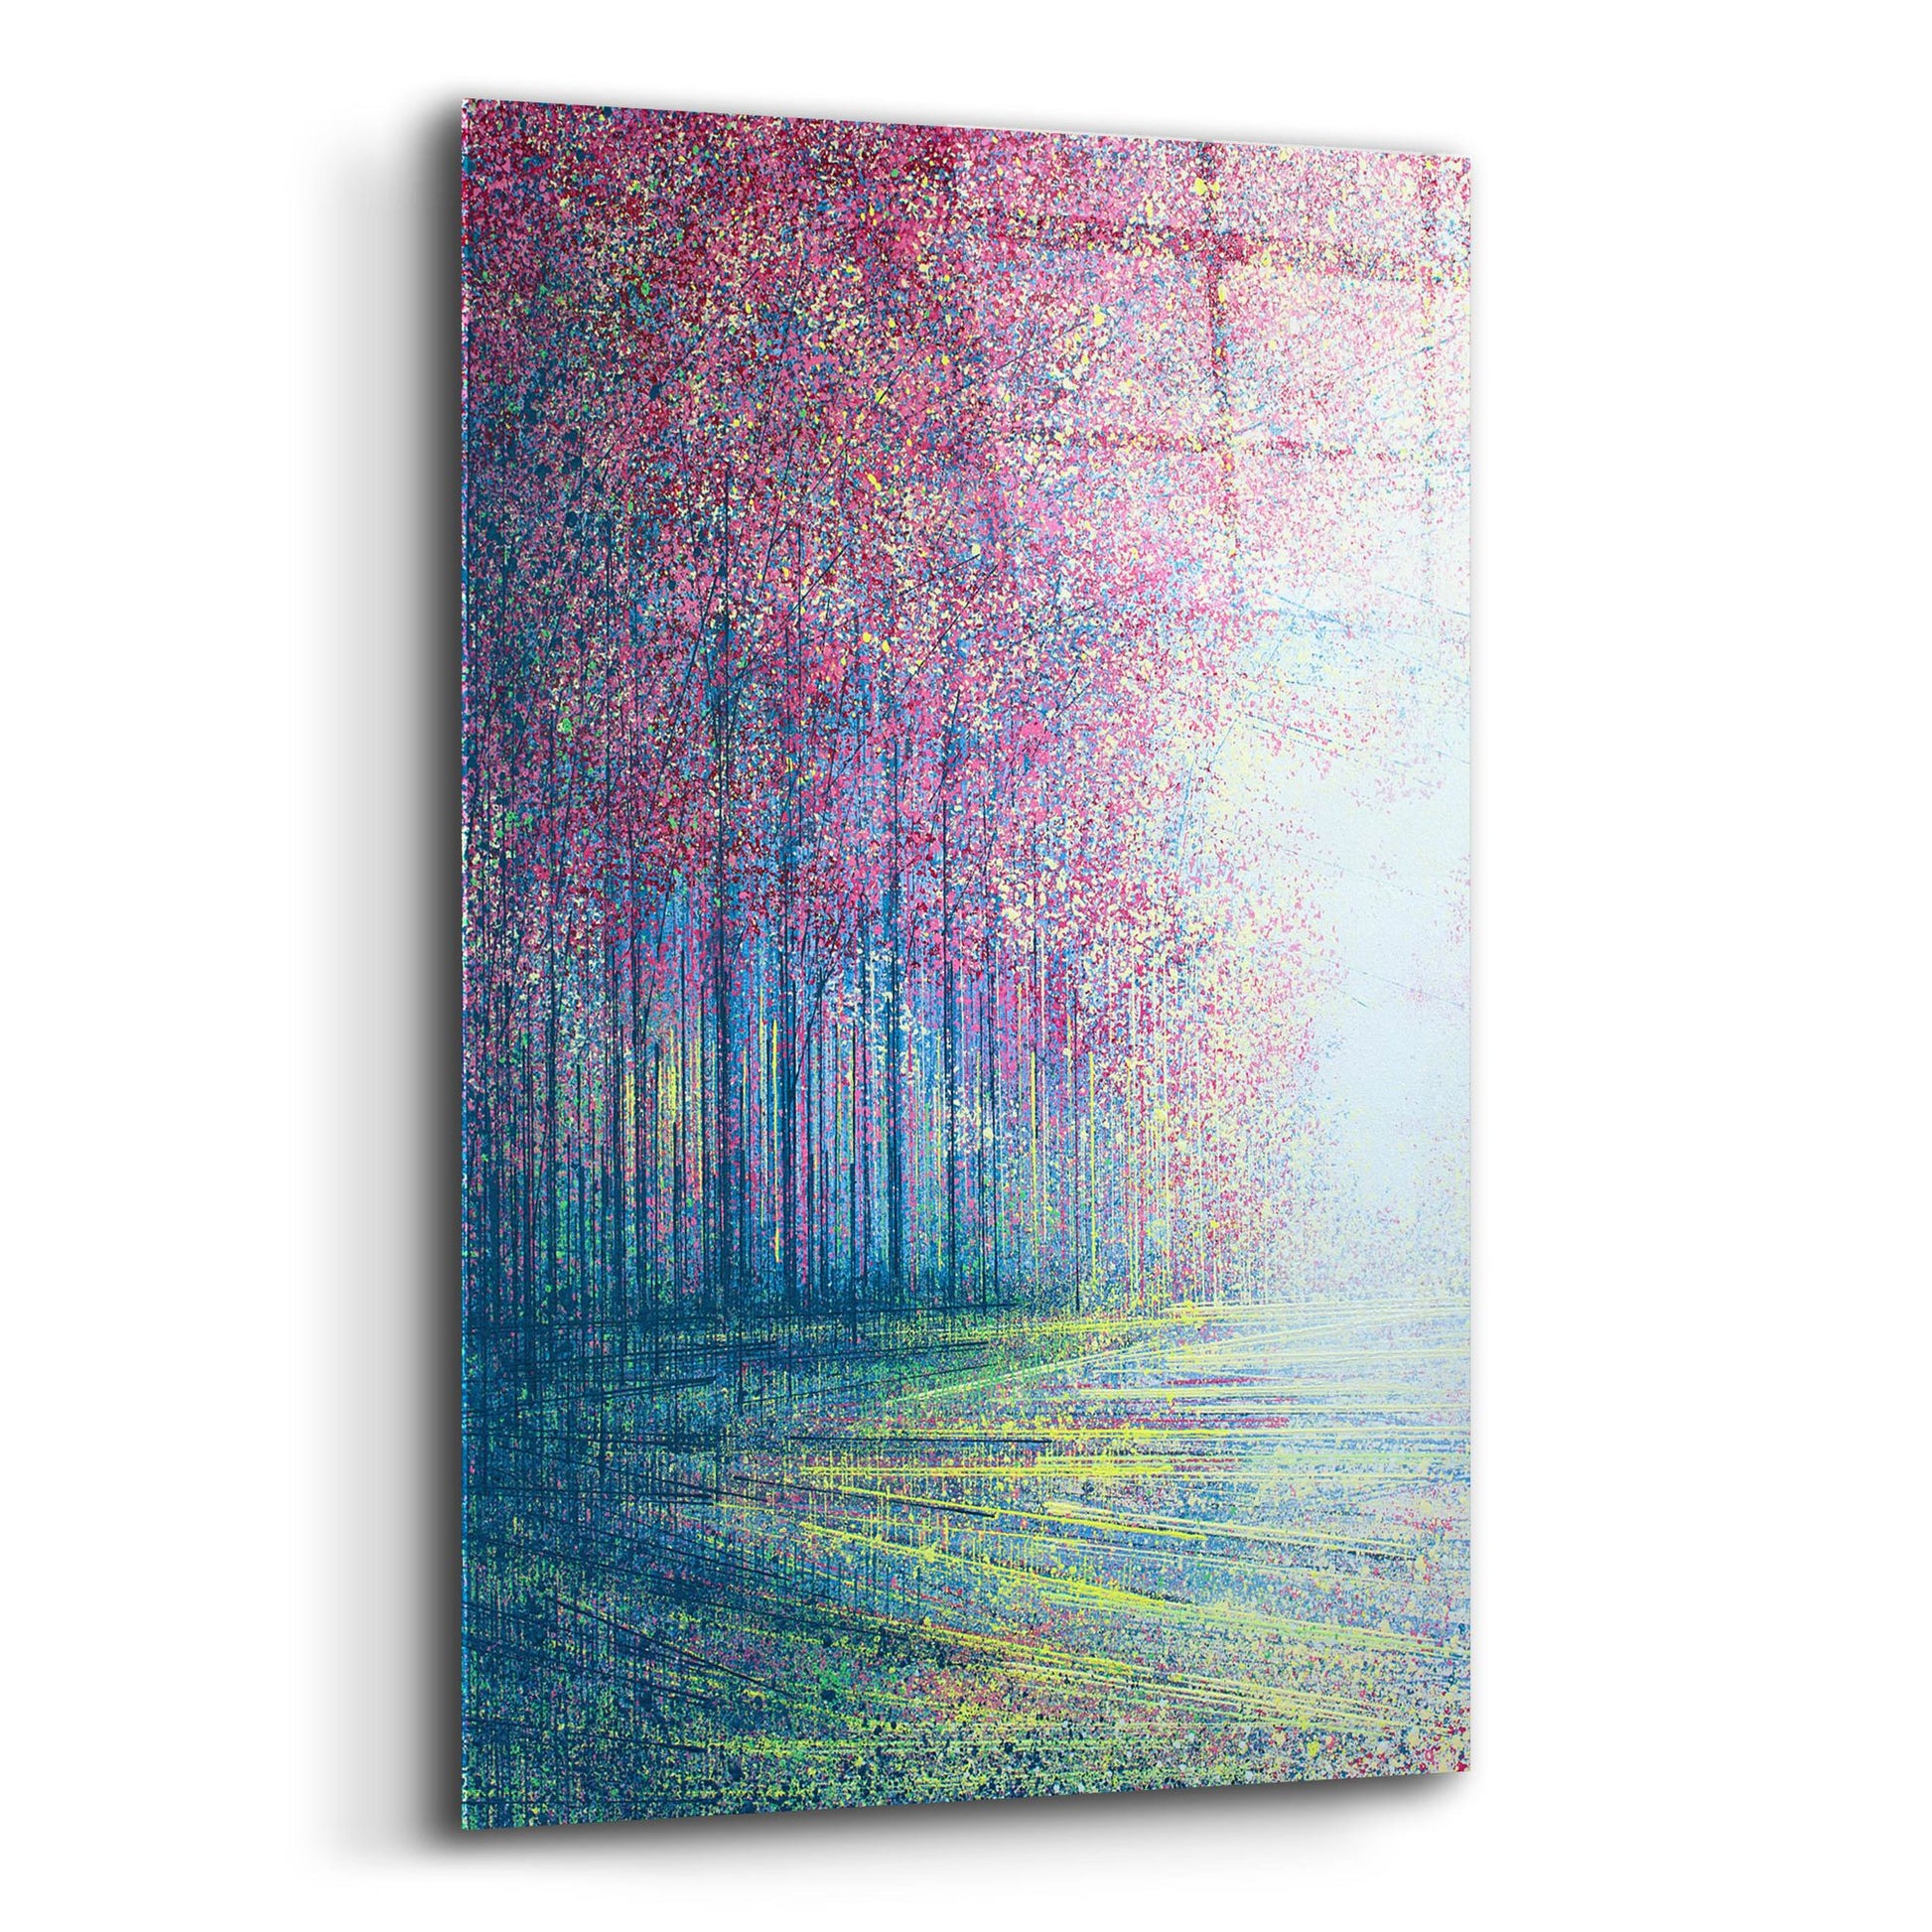 Epic Art 'Tree Blossom in Bright Light' by Marc Todd, Acrylic Glass Wall Art,16x24